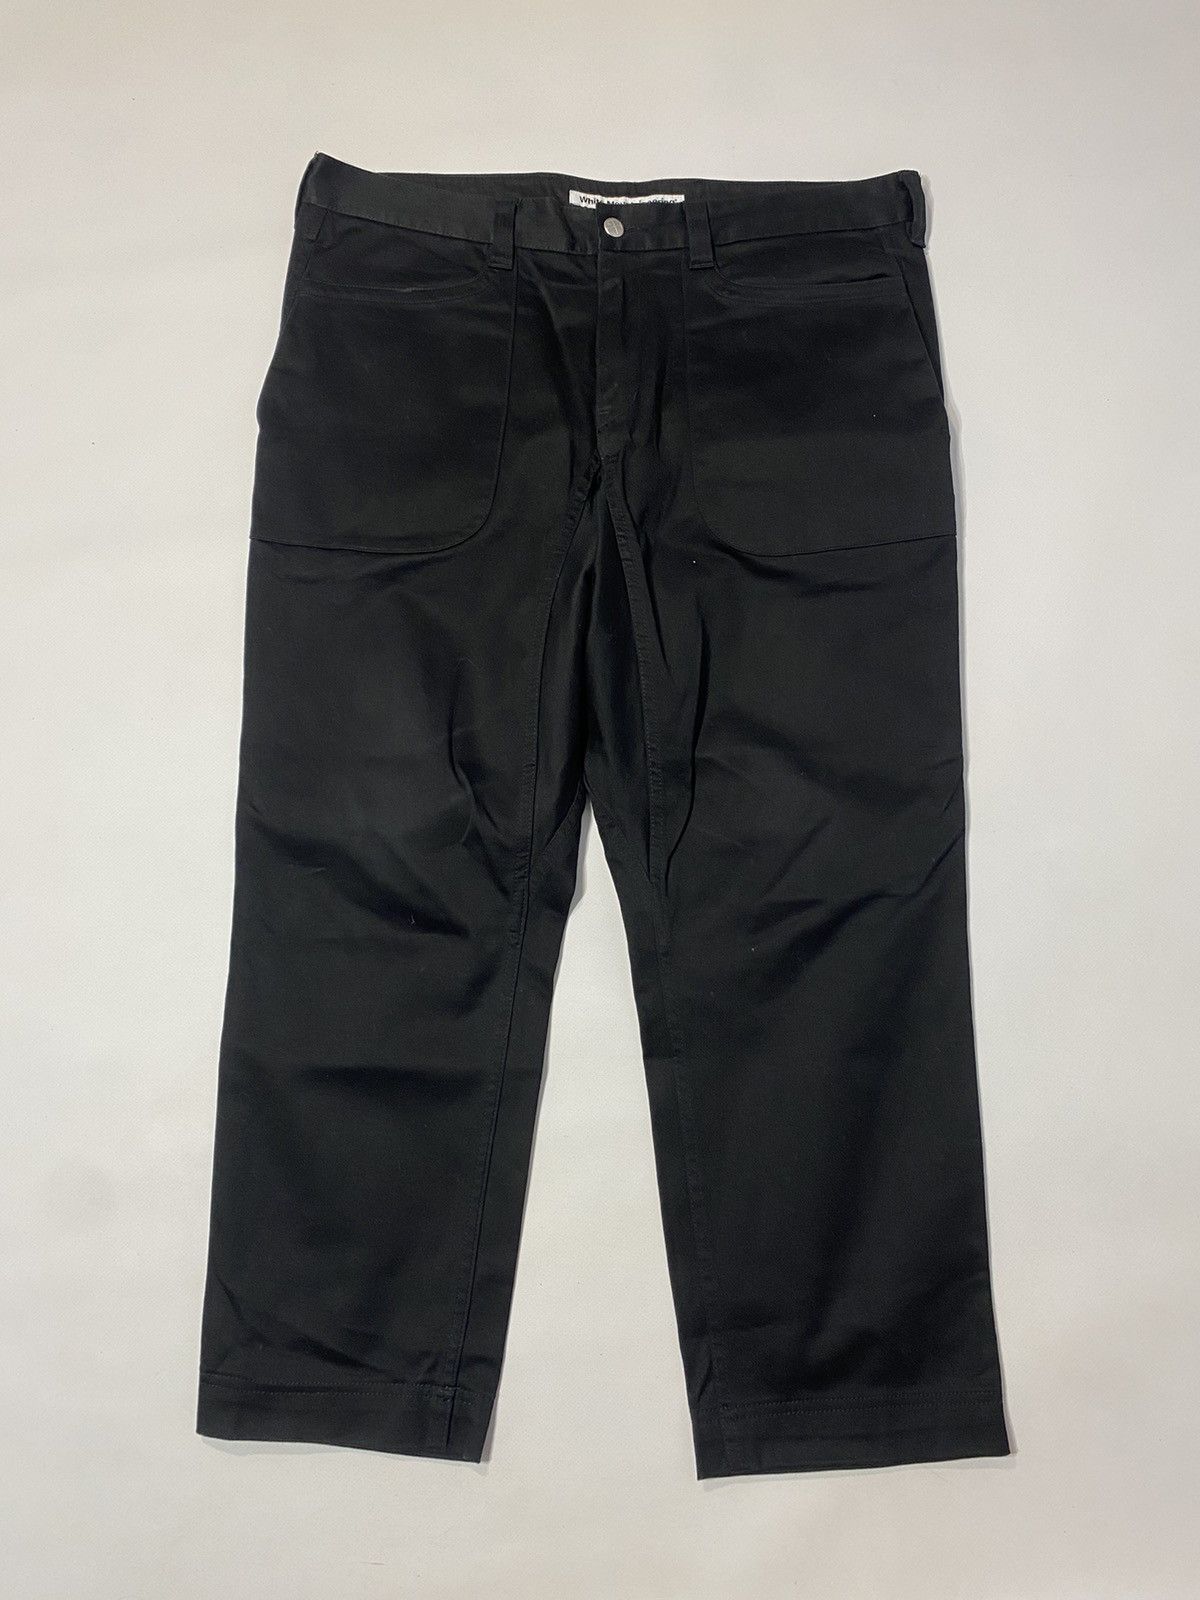 White Mountaineering MADE IN JAPAN White Moutaineering Casual Black Pants Size US 34 / EU 50 - 1 Preview